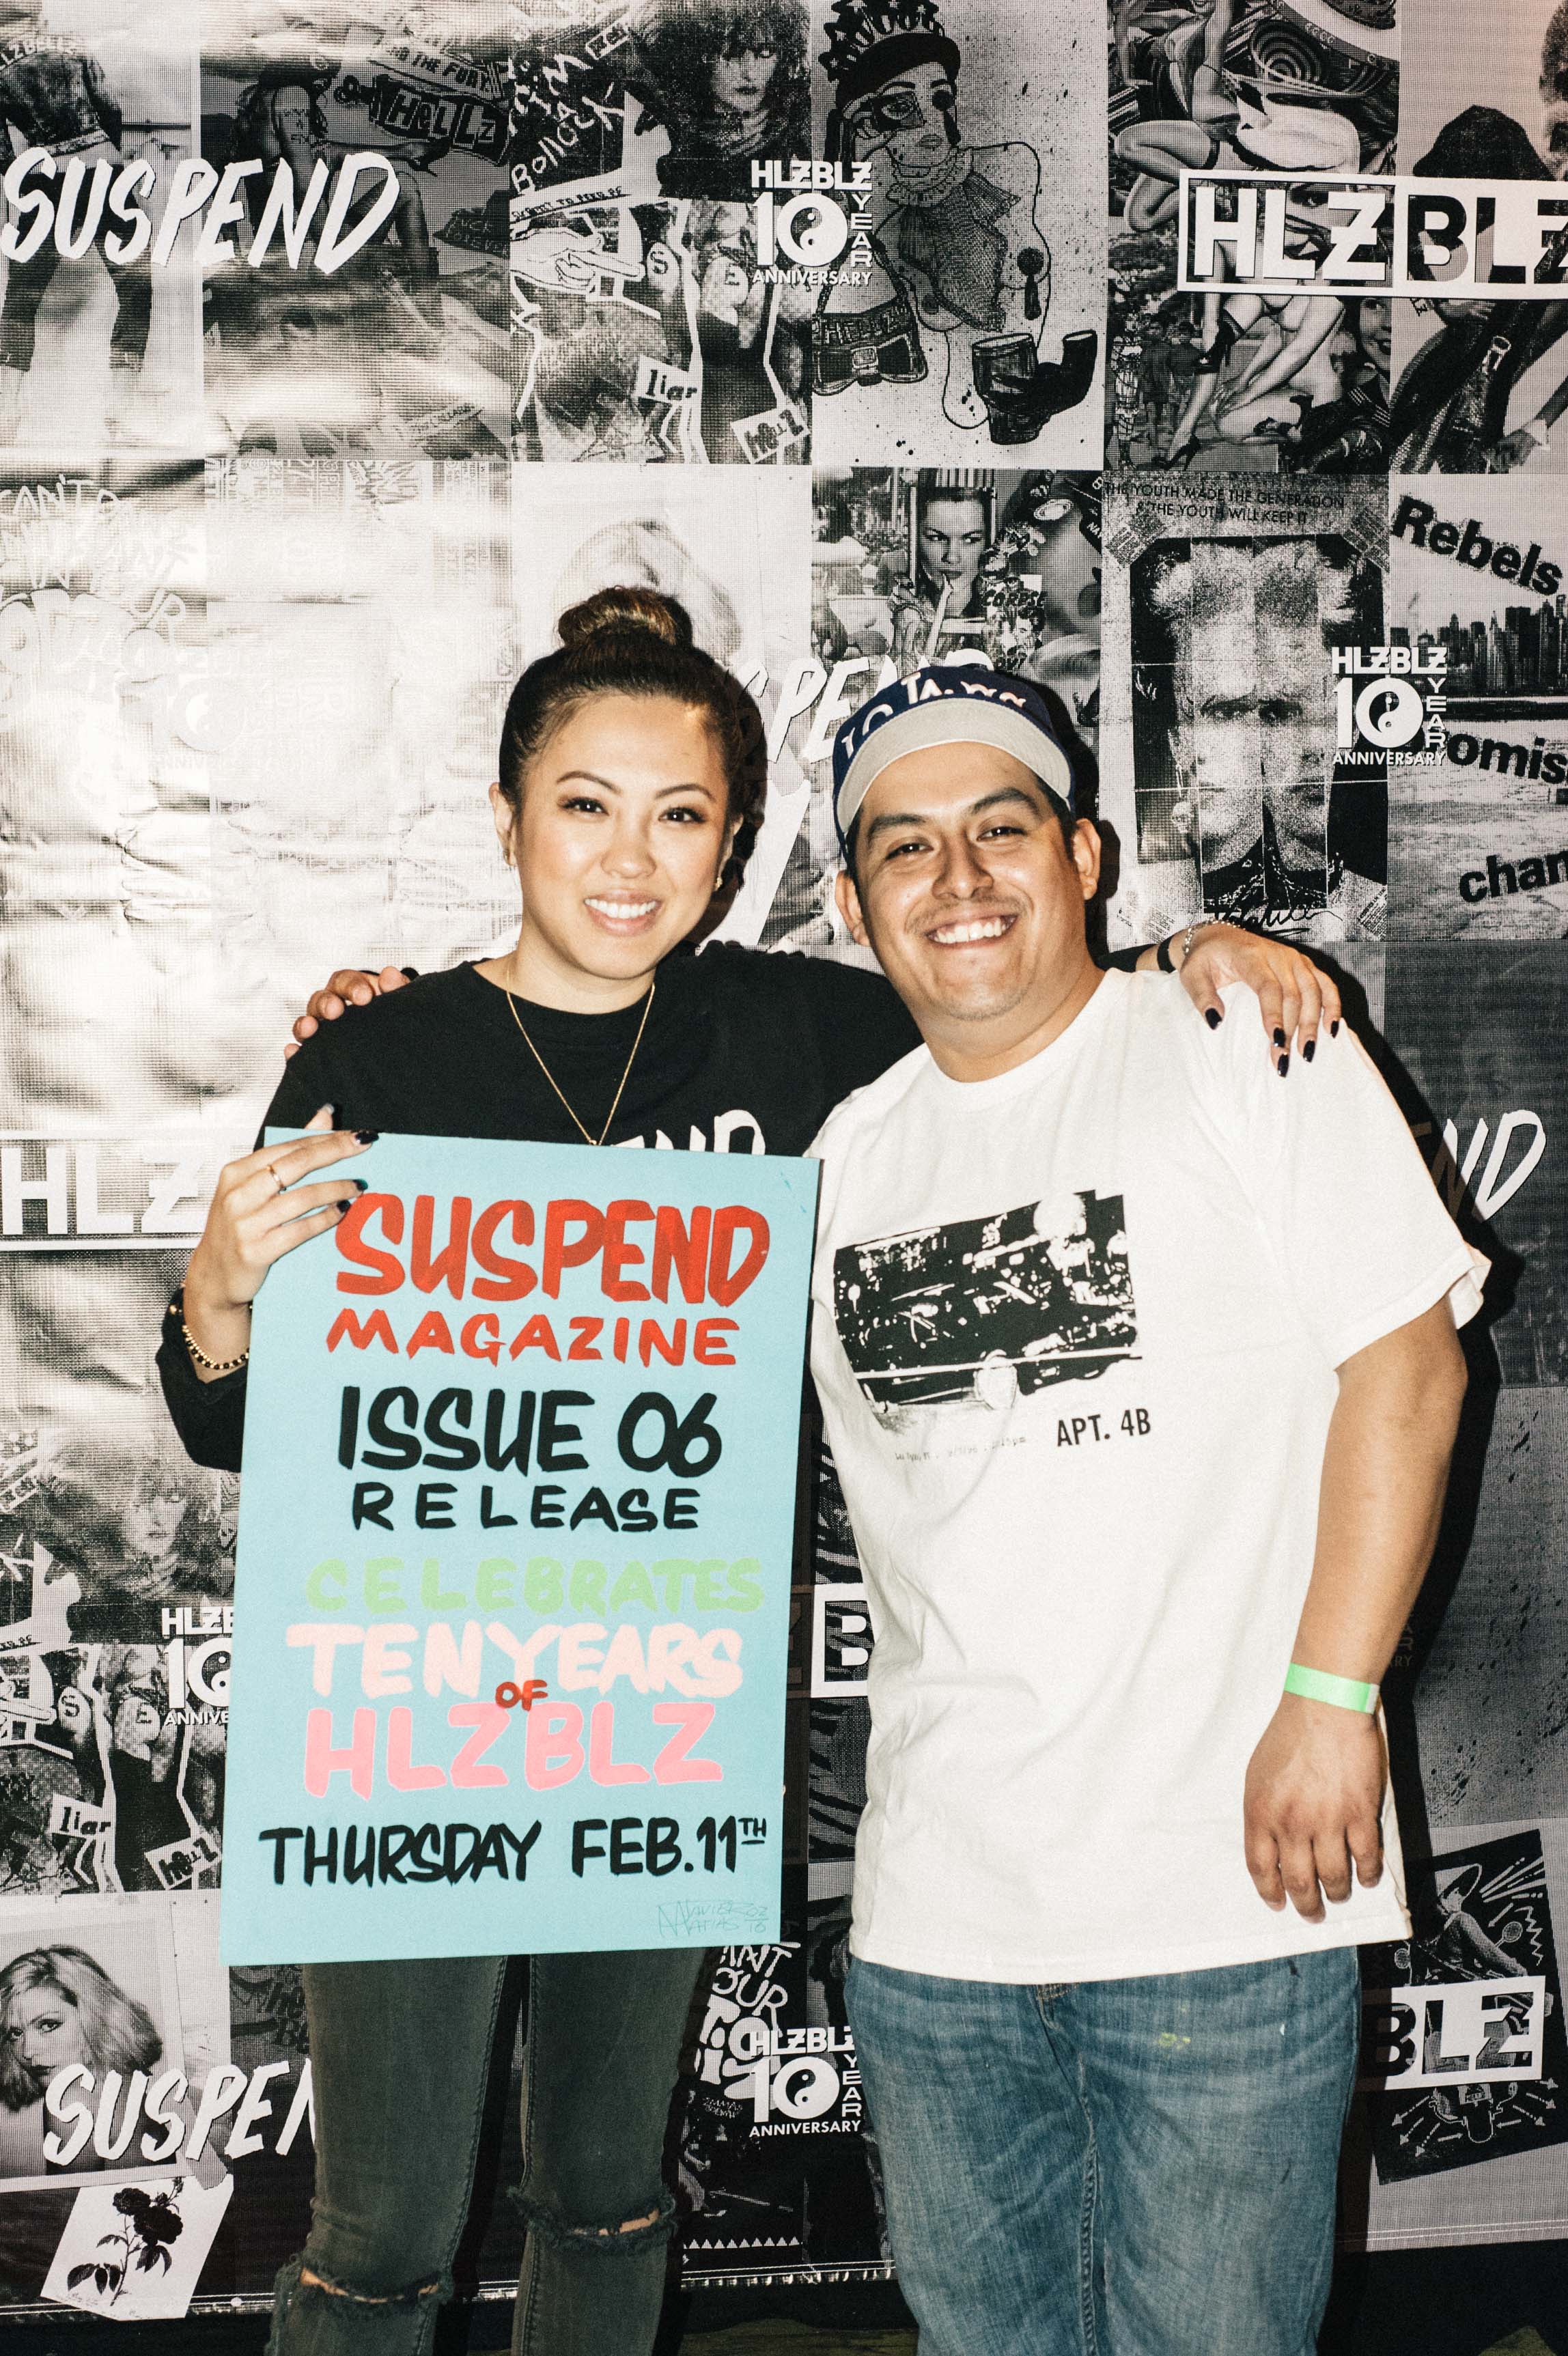  Javier (Mid City Signs)&nbsp;at the ISSUE 06 Launch x HLZBLZ 10Year Anniversary (Feb 11) at Globe Theater. / Photo: © Jordan Abapo for SUSPEND Magazine 